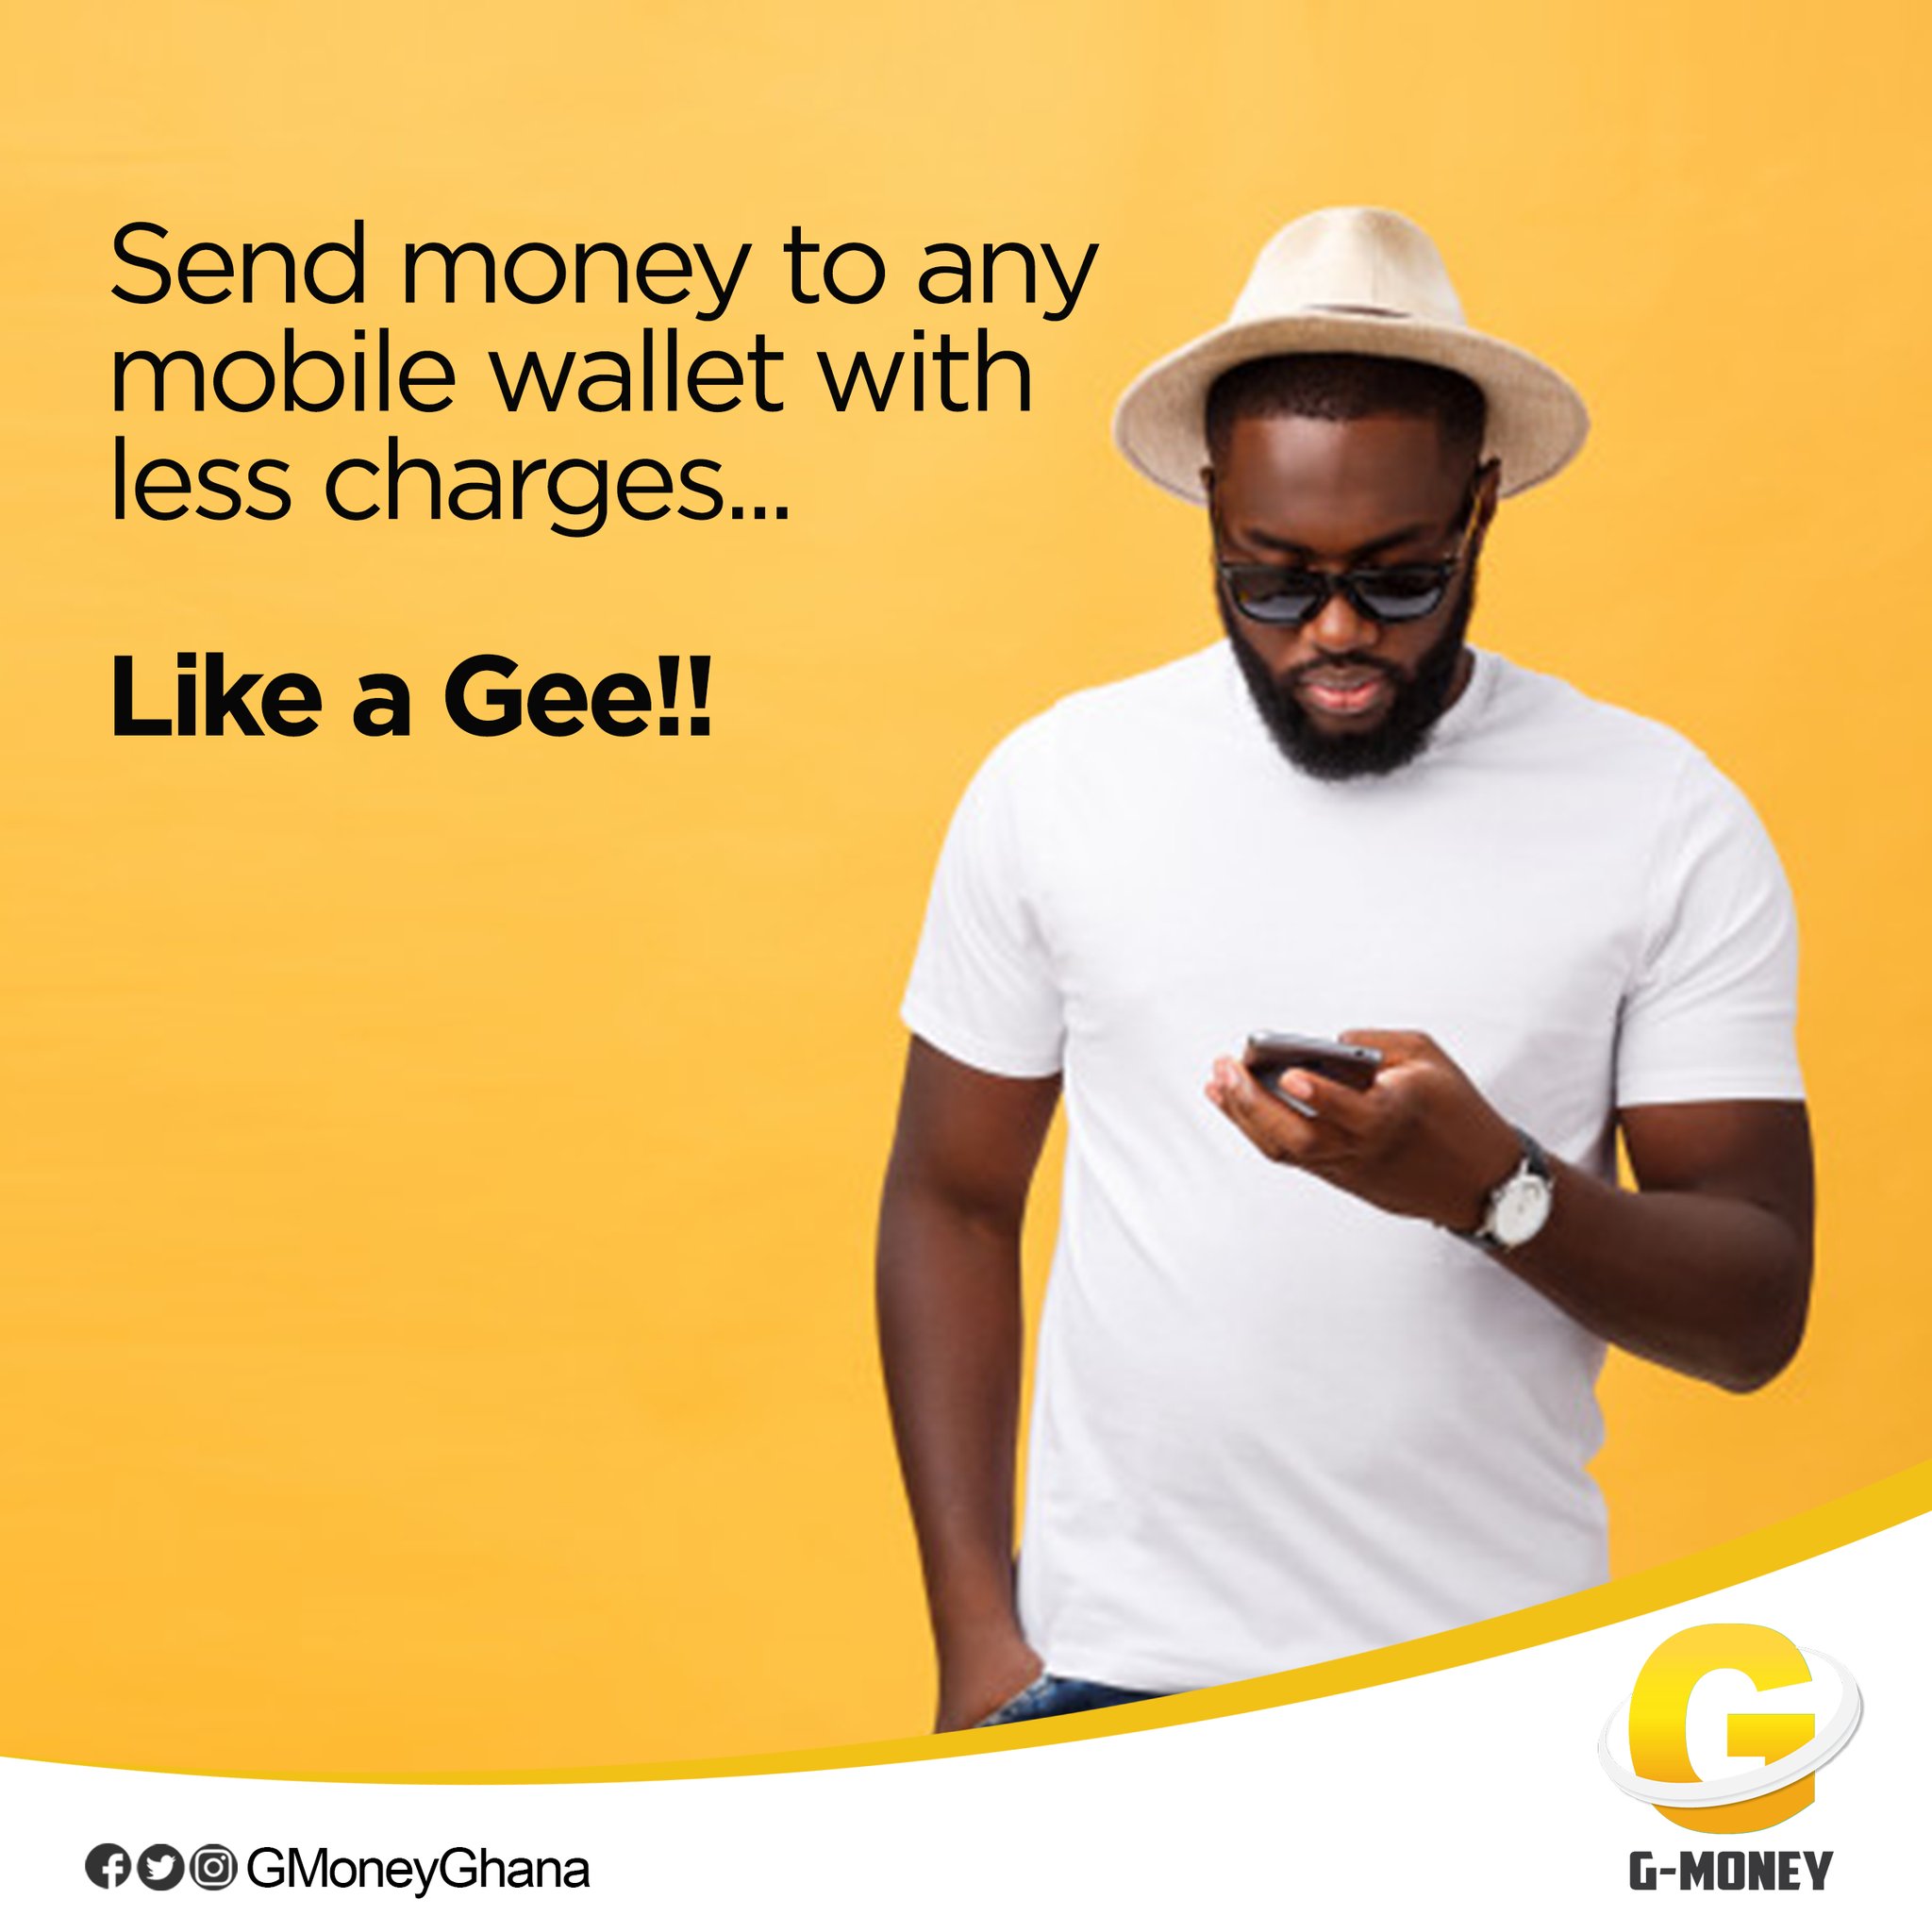 GCB G-Money See How to Register Yourself